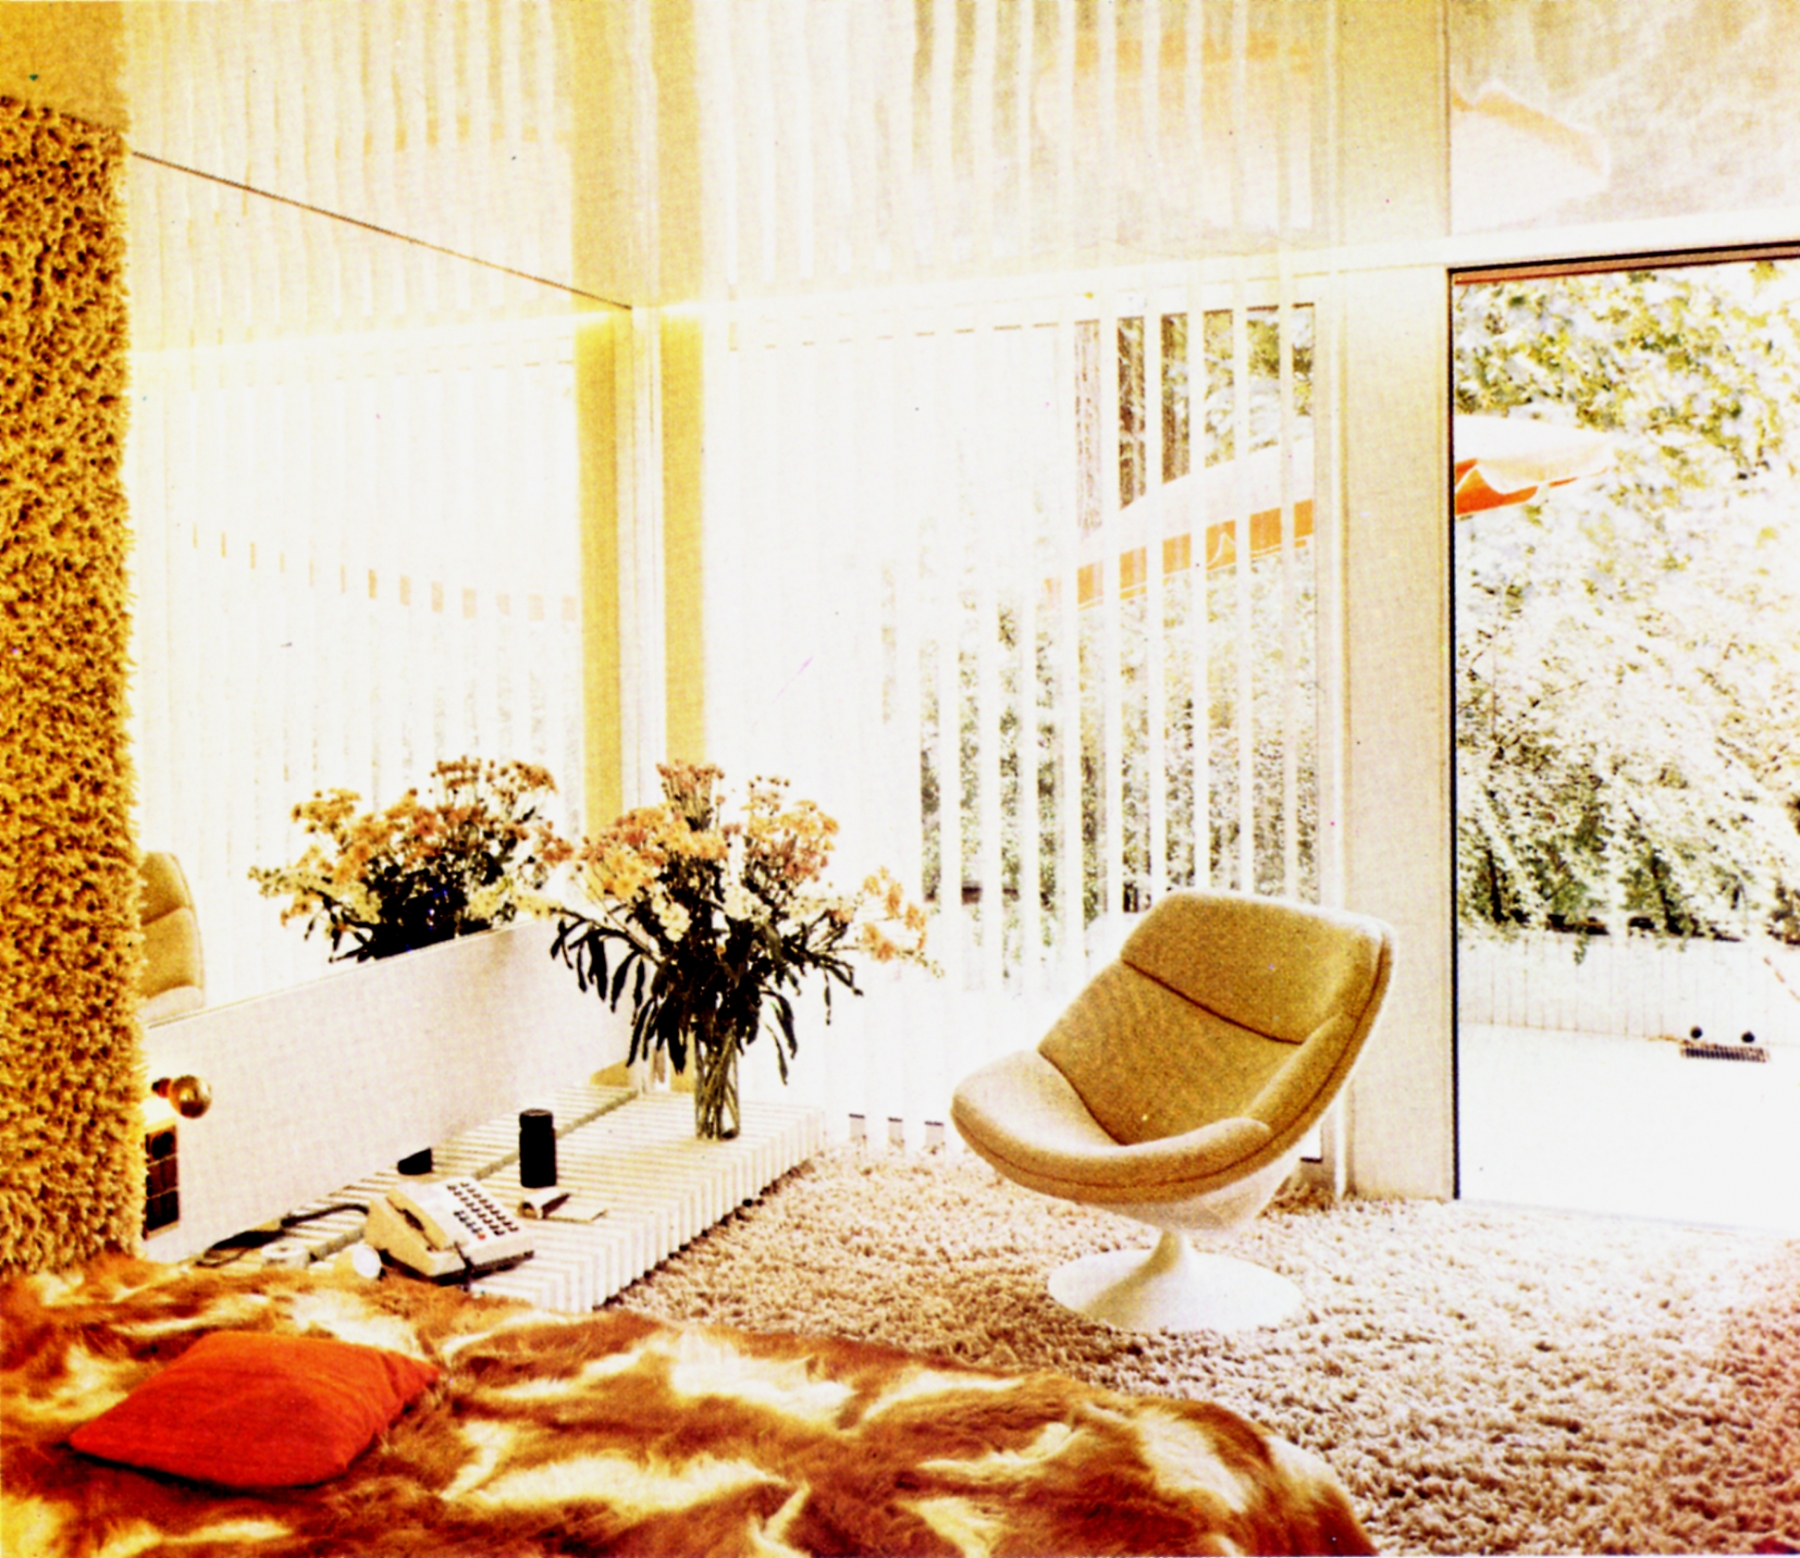 Apartment with Low Table by Pierre Guariche, c. 1960s